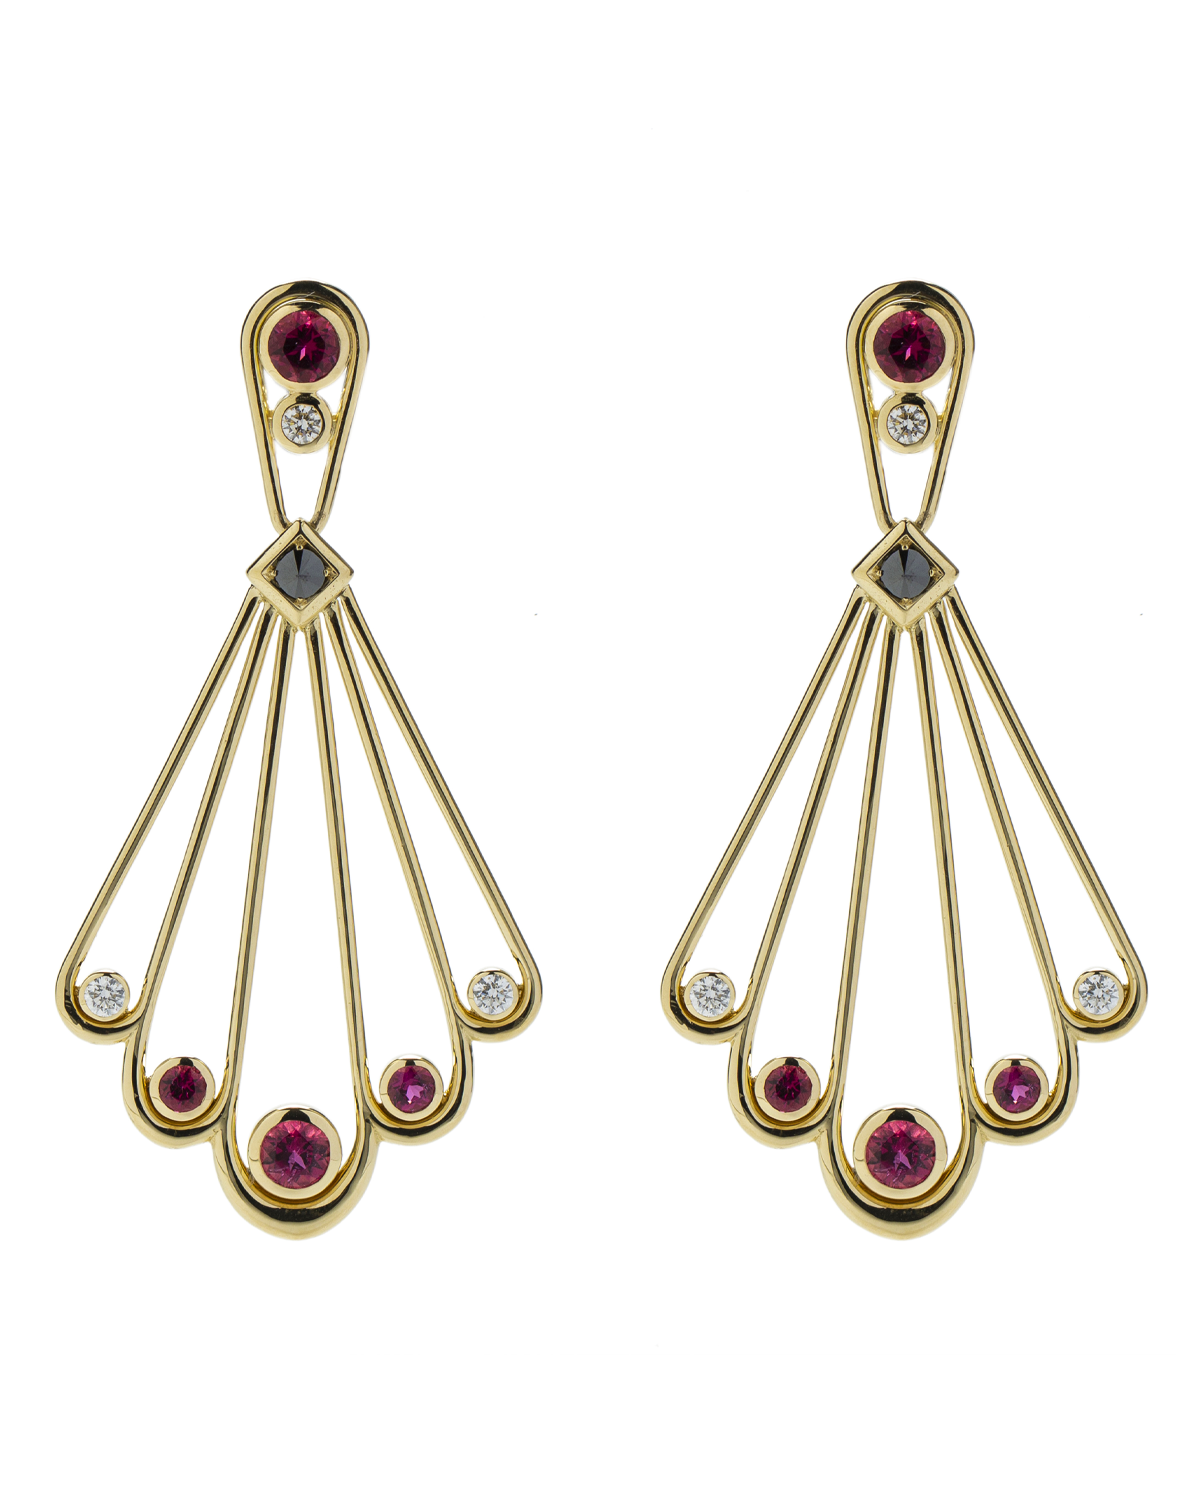 Biela Earrings with Rubellite, White and Inverted Black Diamonds